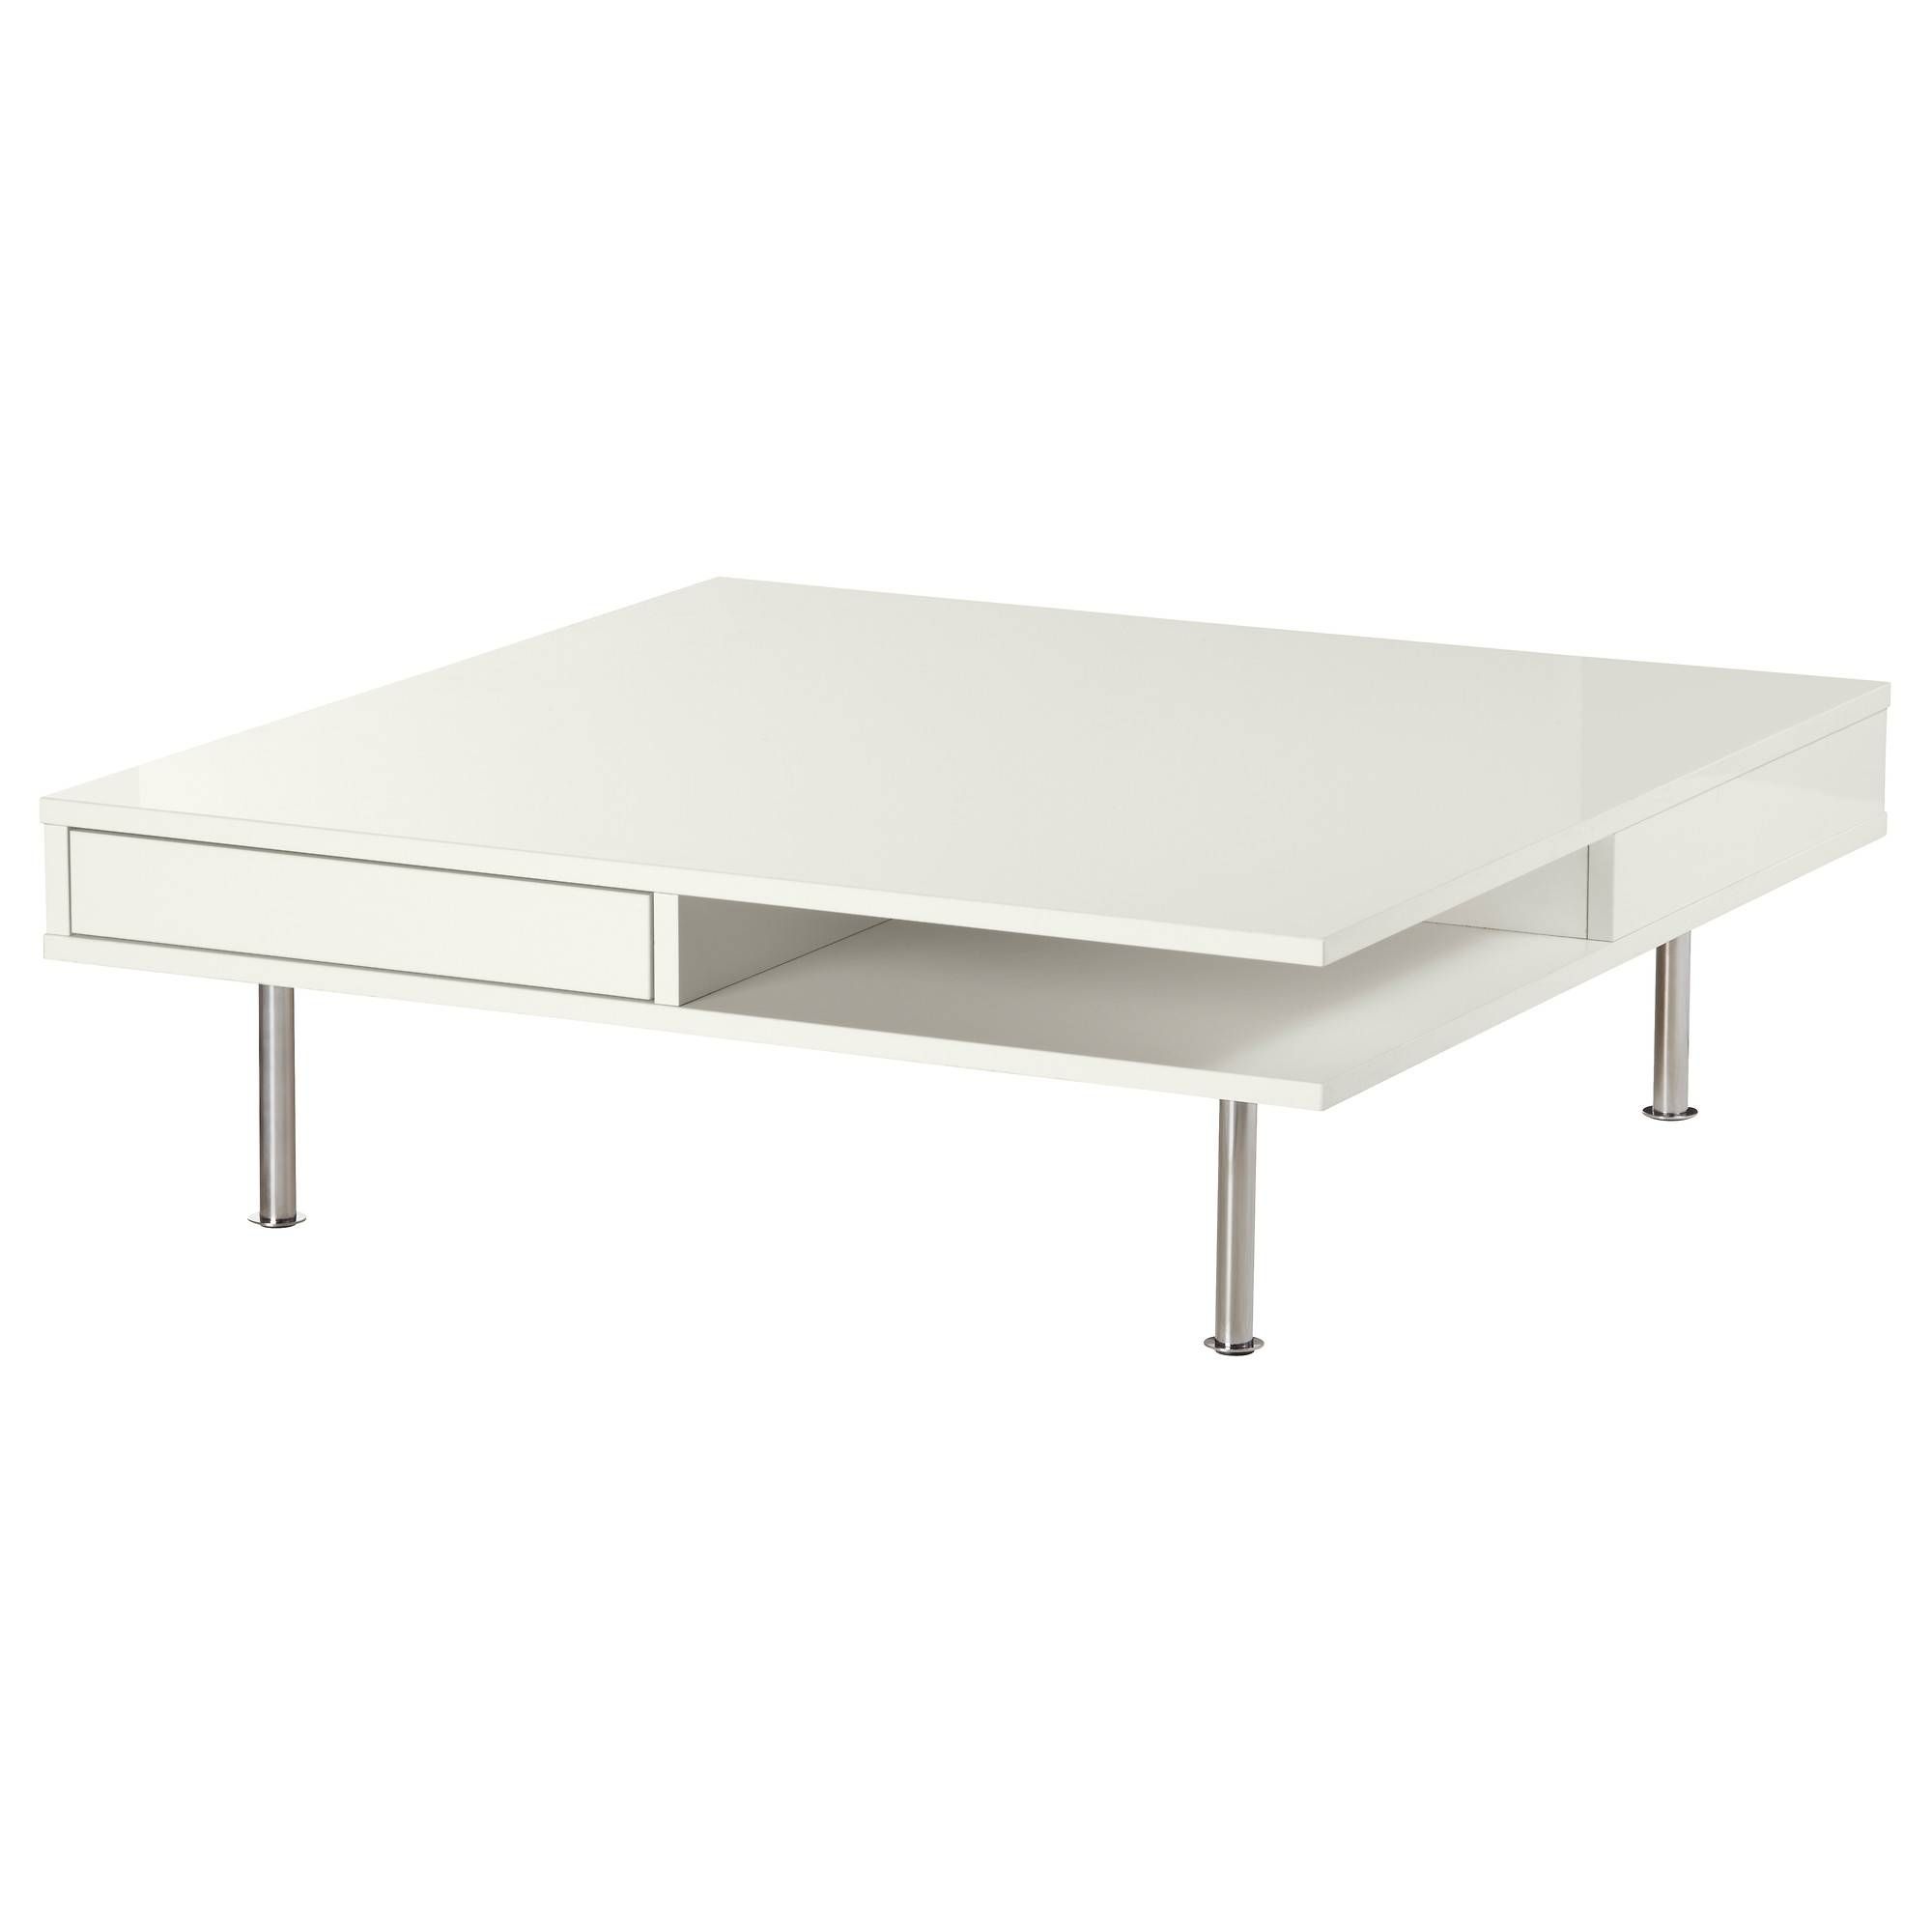 Tofteryd Coffee Table High Gloss White 95x95 Cm – Ikea Throughout White And Black Coffee Tables (View 28 of 30)